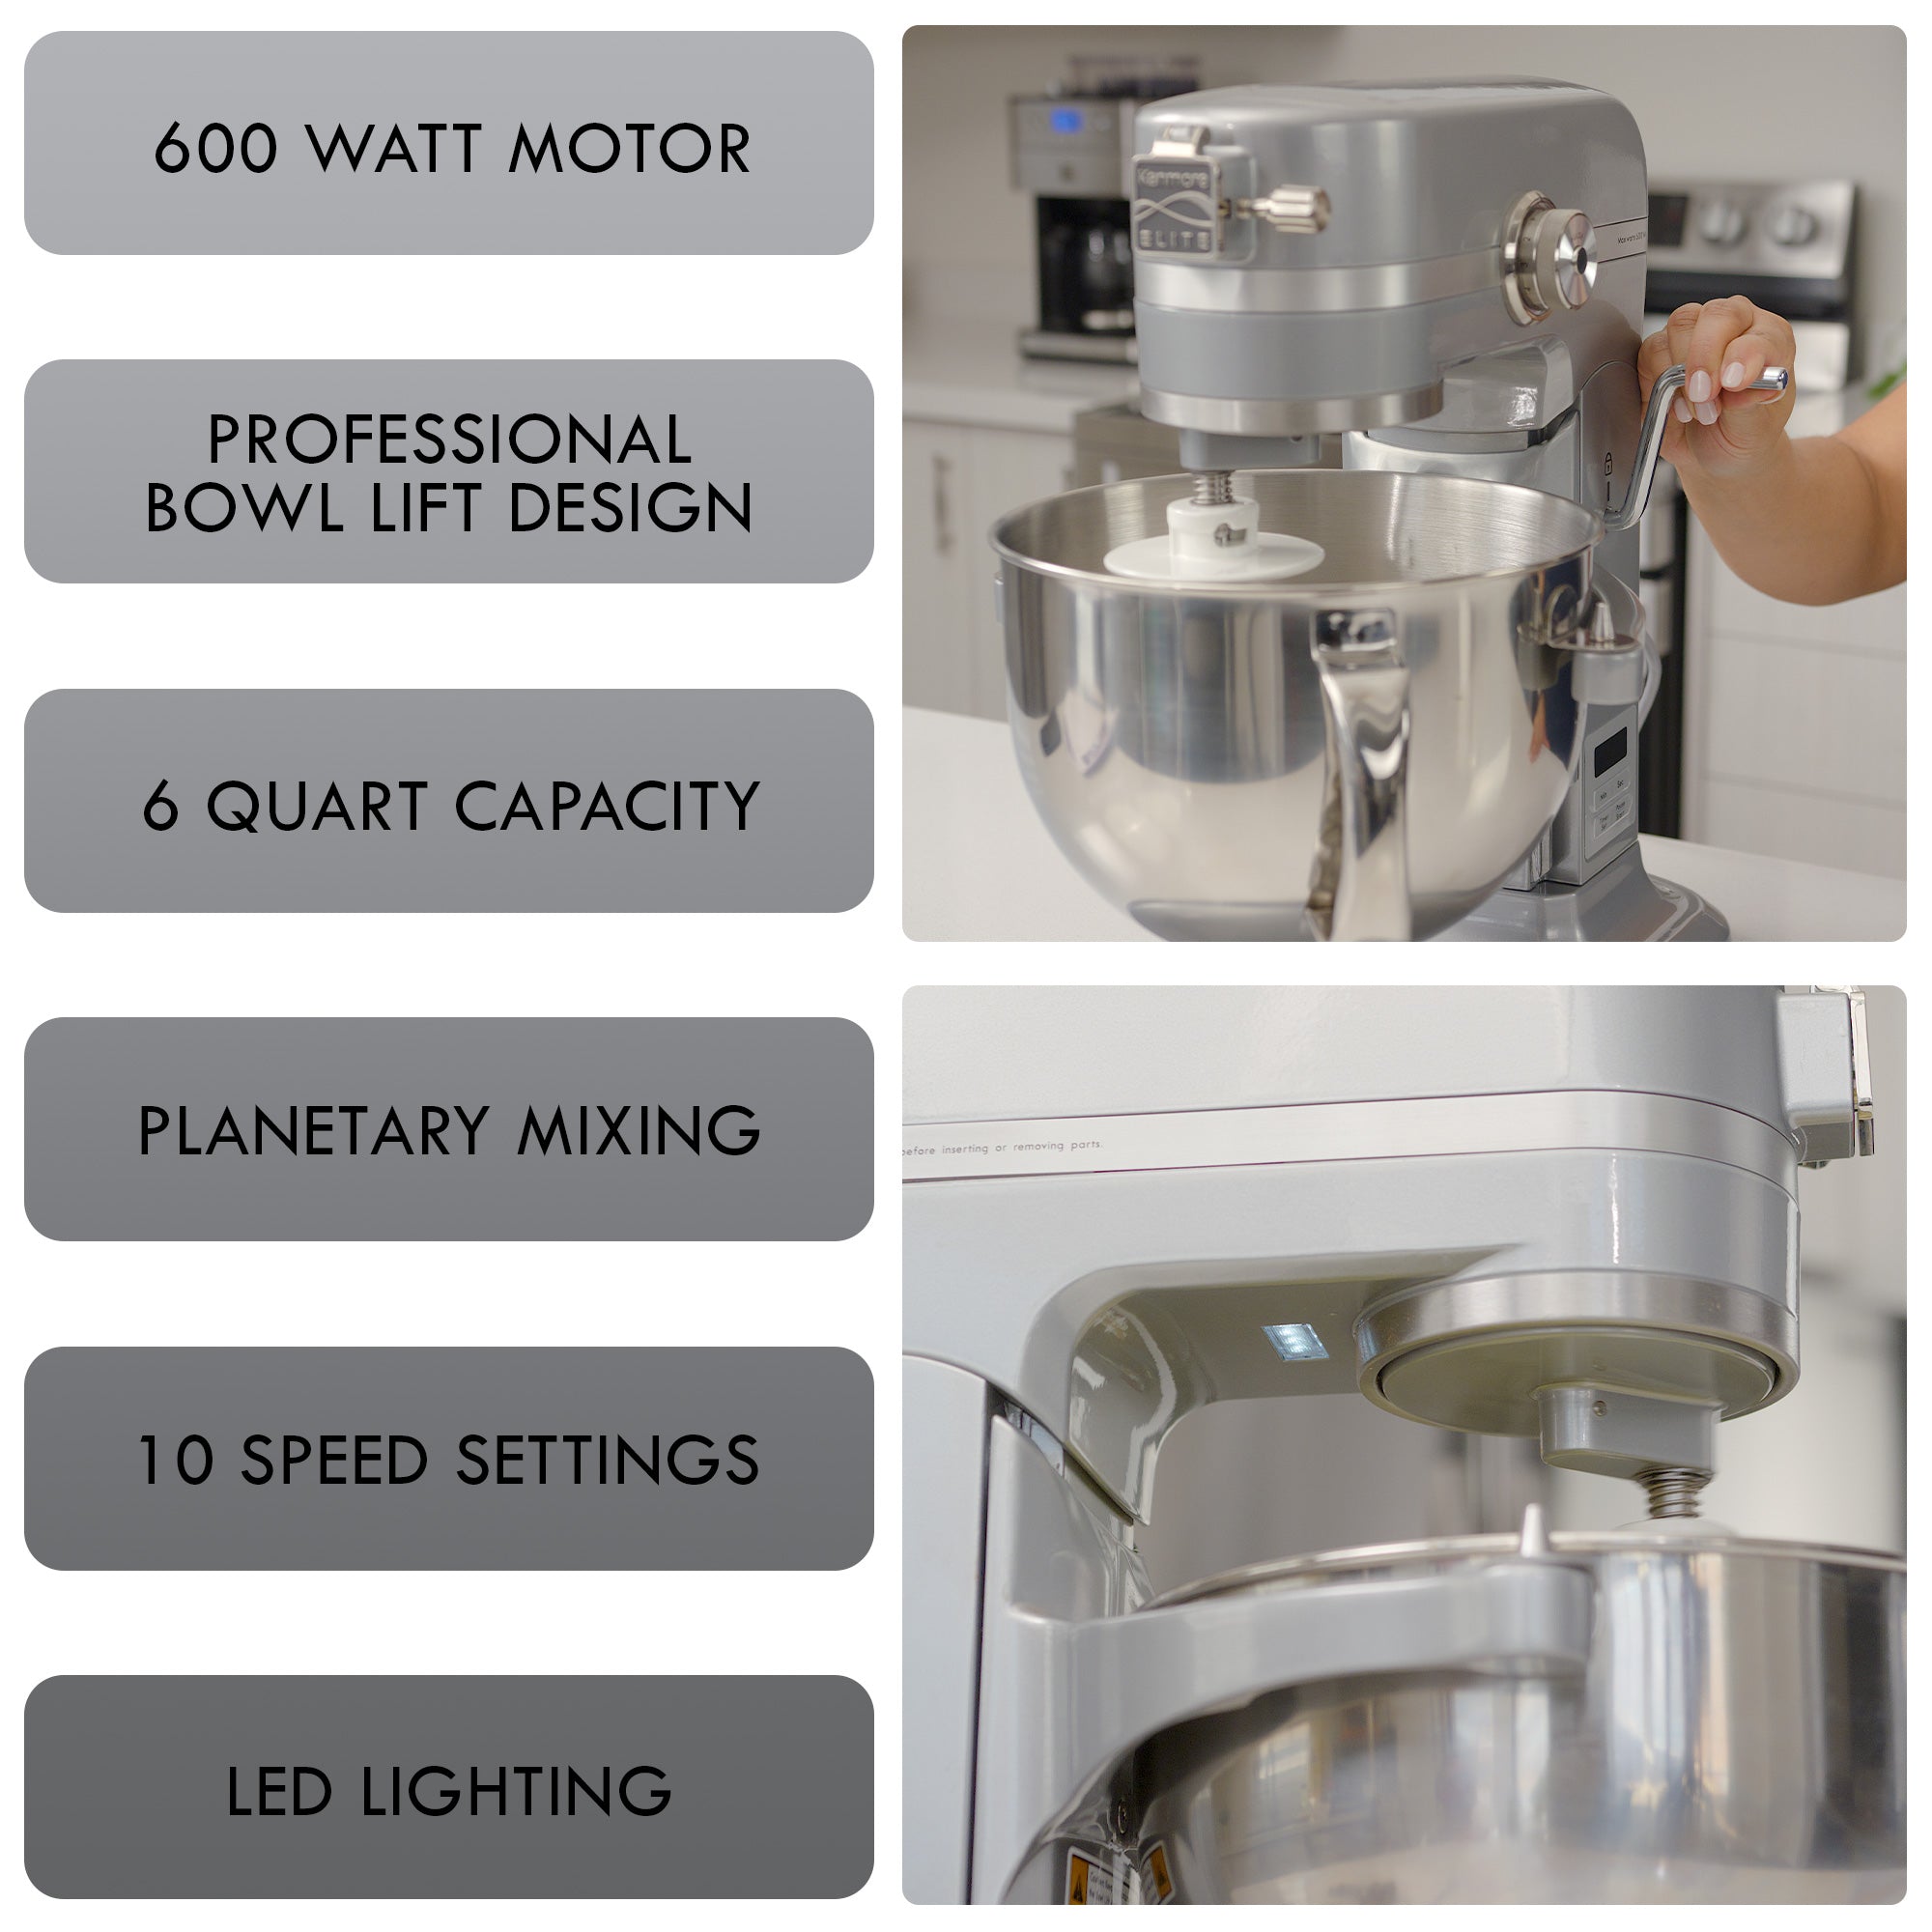 Two closeup images of Kenmore 600 Watt bowl lift mixer with features listed to the left: 600 watt motor, professional bowl-lift design, 6 quart capacity, planetary mixing, 10 speed settings, LED lighting